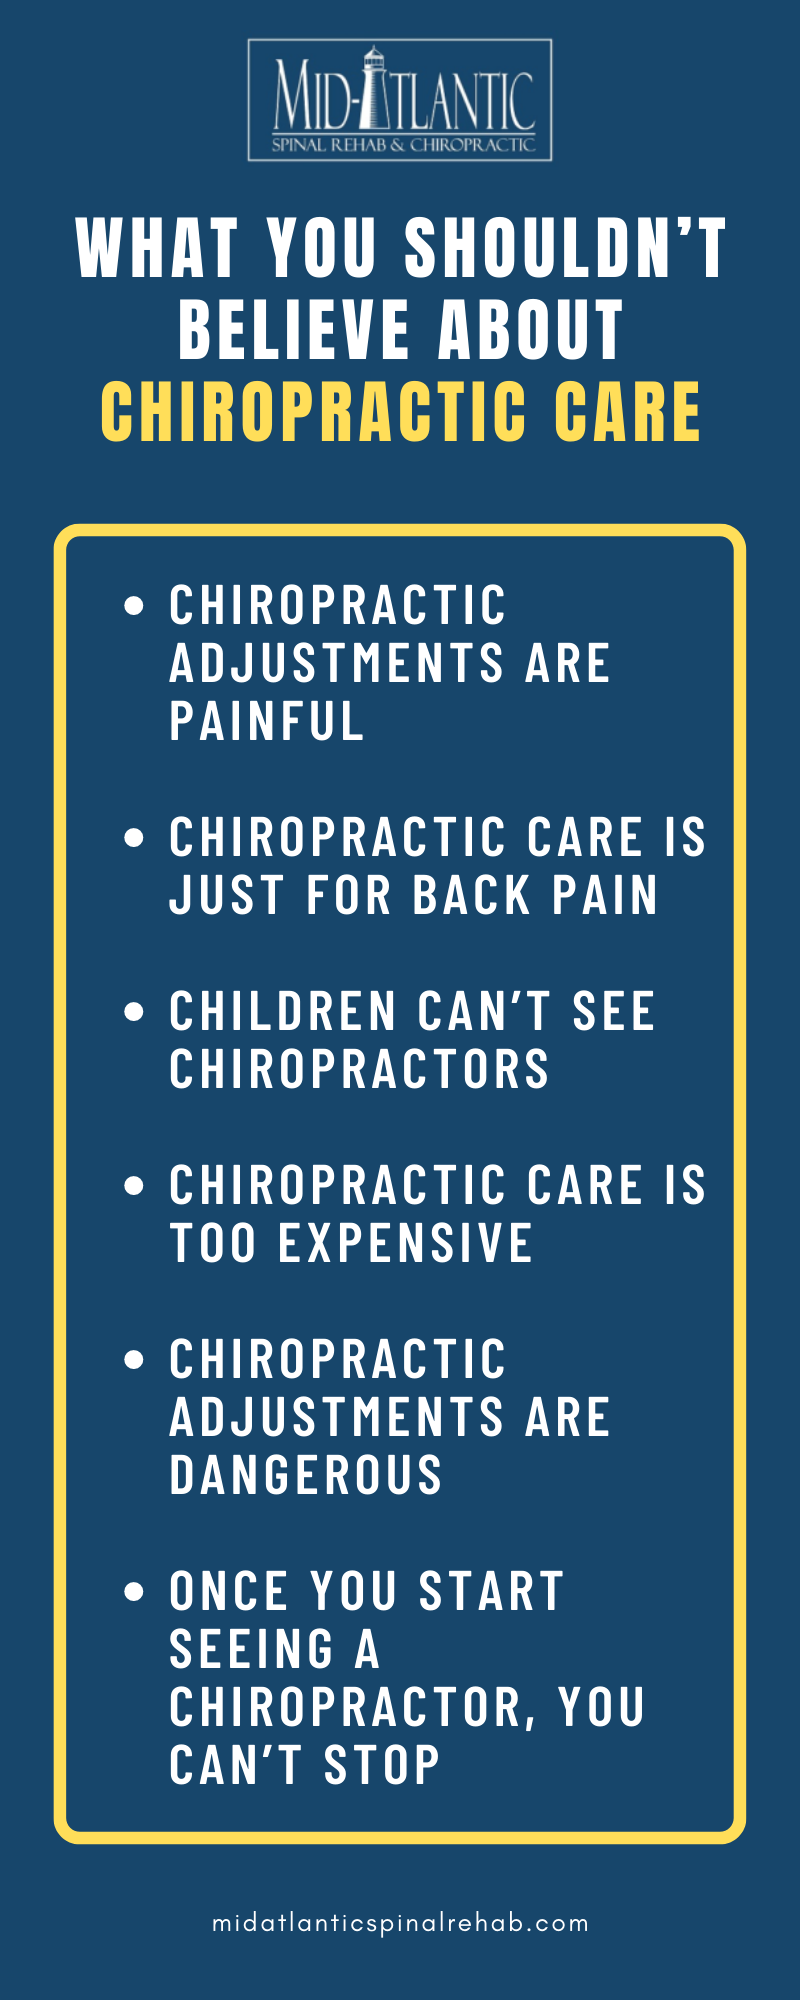 WHAT YOU SHOULDN’T BELIEVE ABOUT CHIROPRACTIC CARE